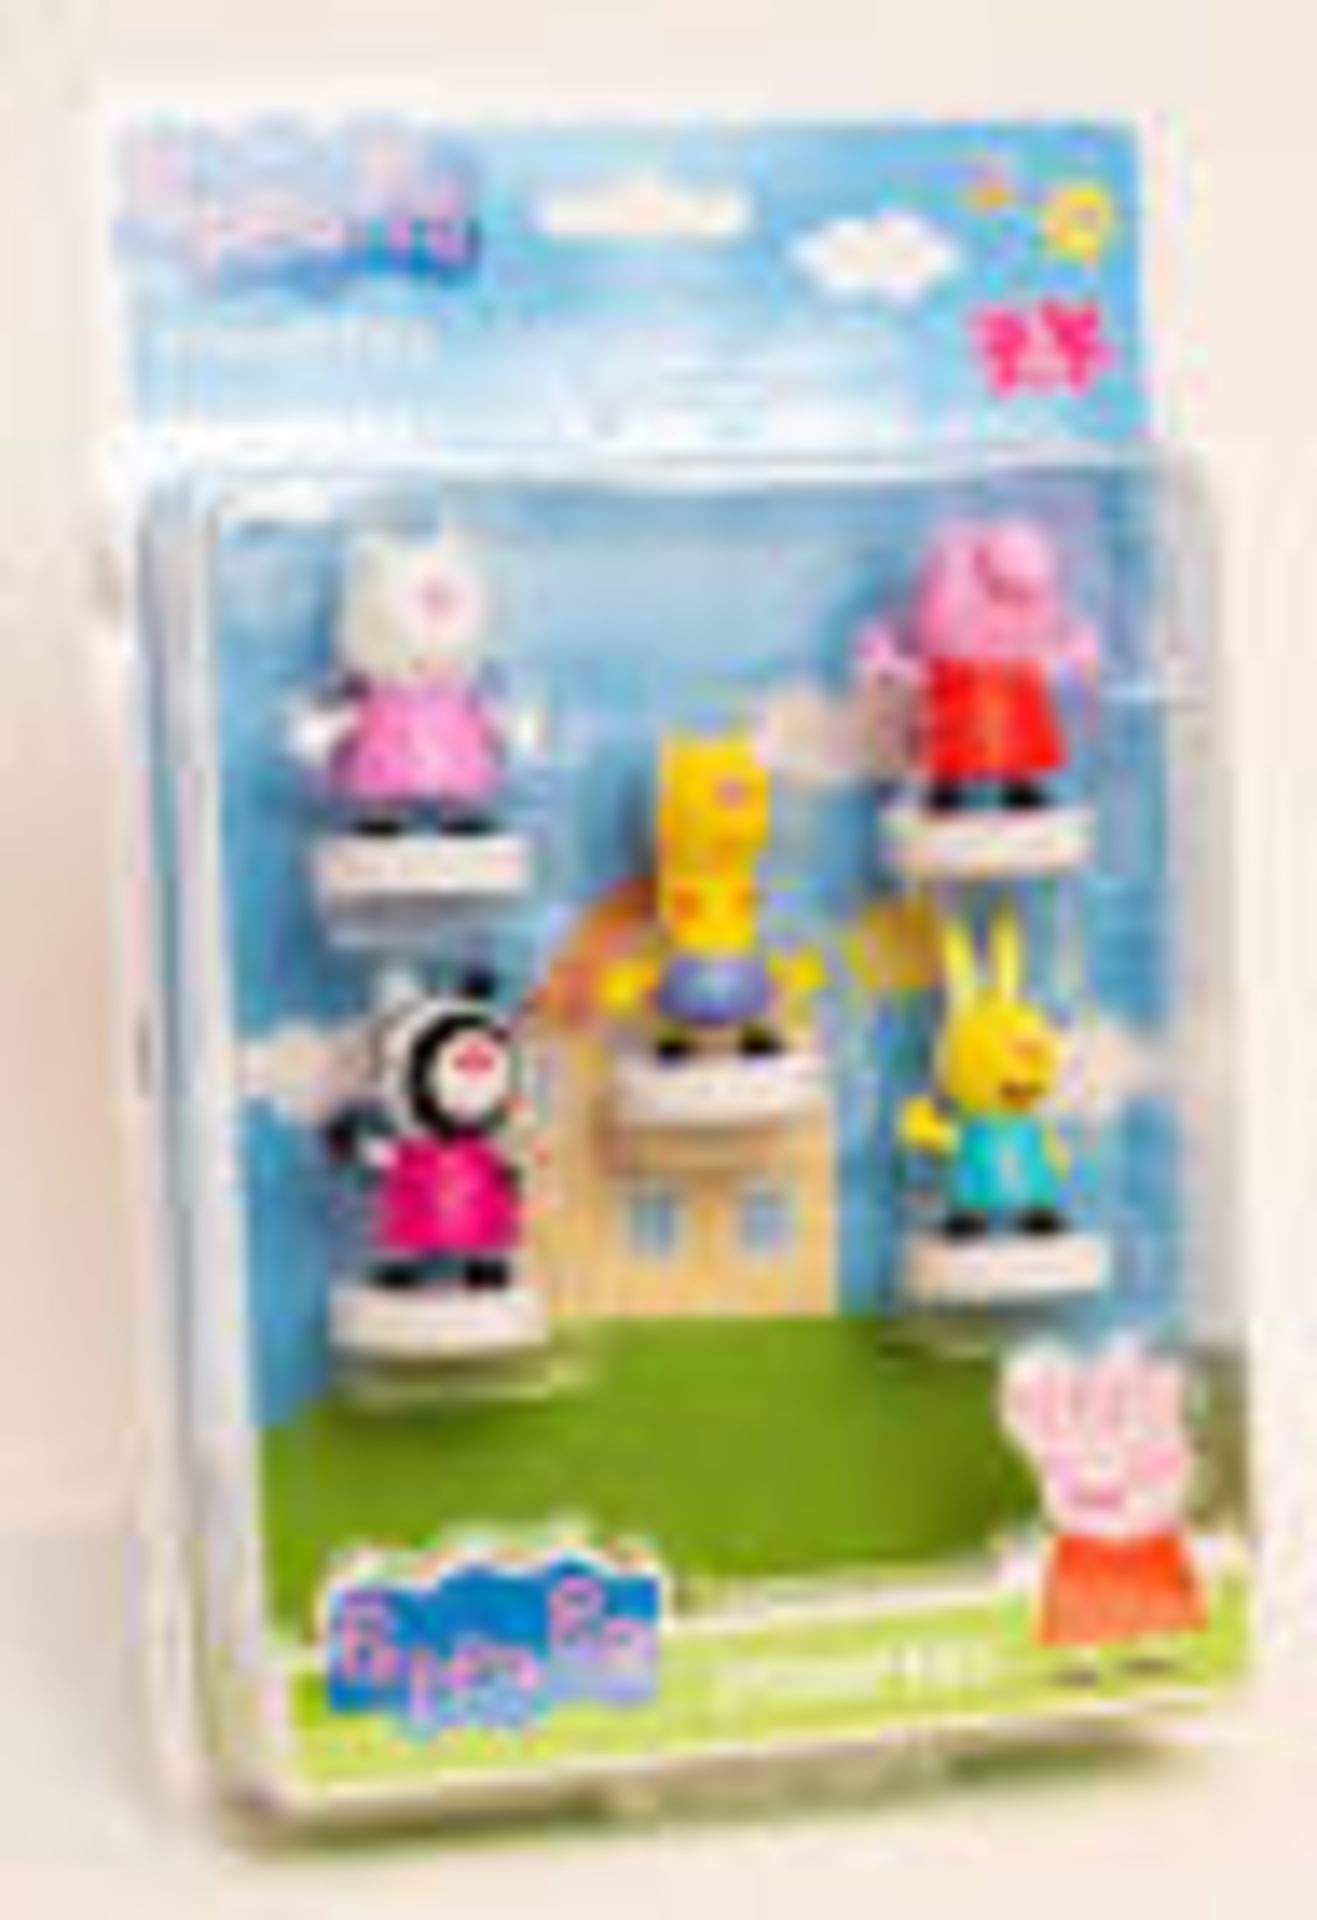 100 x Peppa Pig Toppers/Stamper Sets - Image 3 of 4